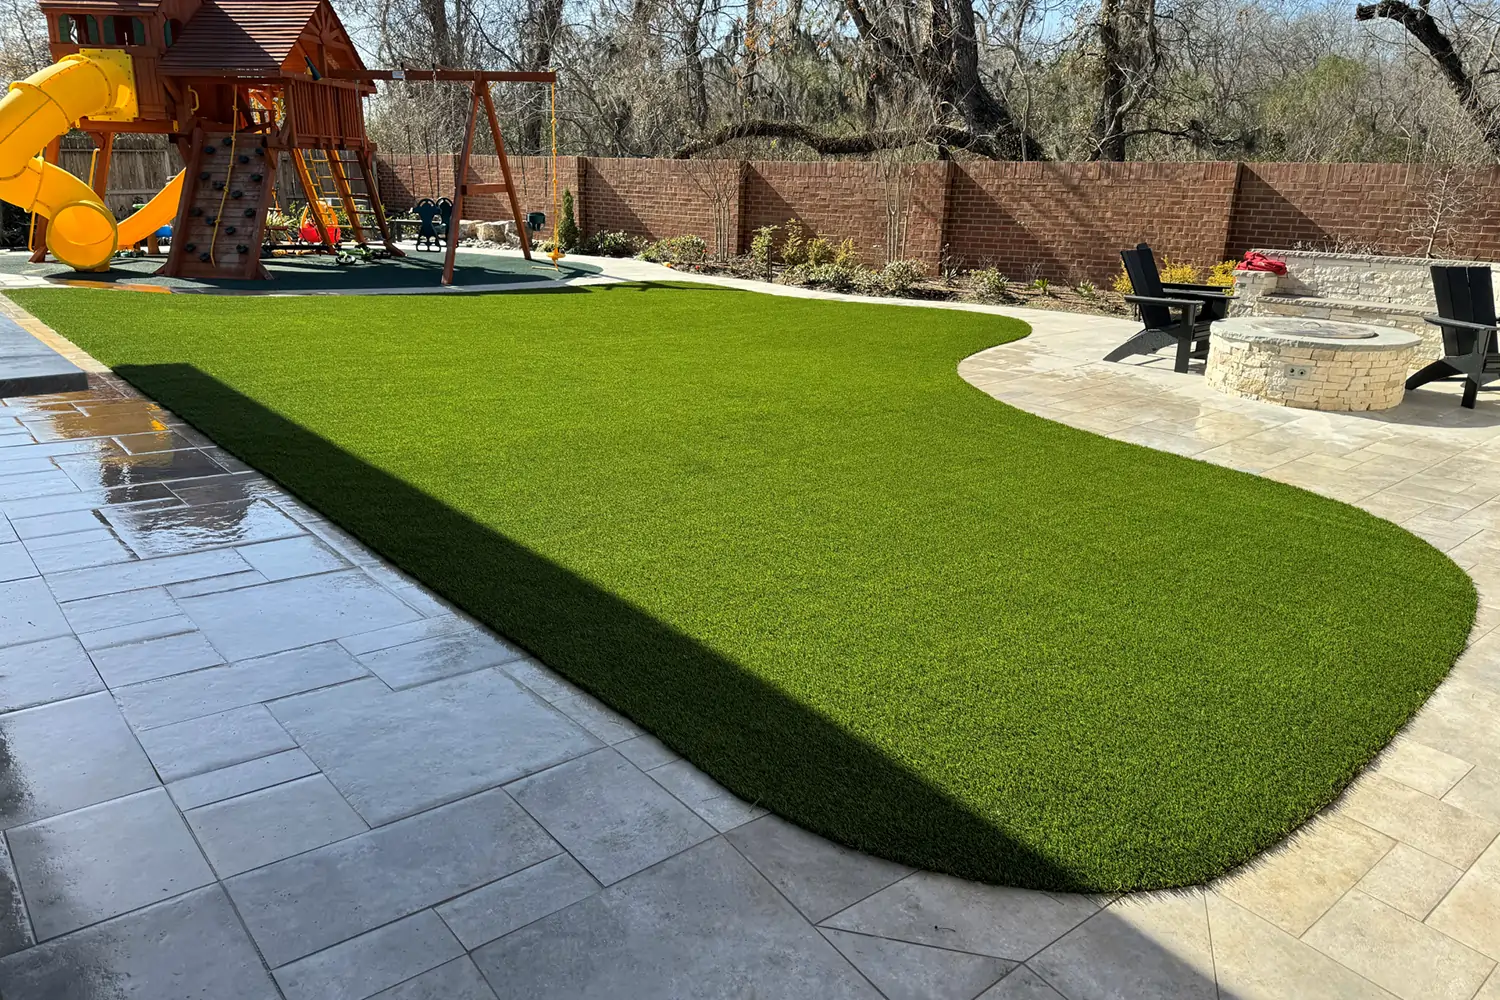 Residential playground installed by SYNLawn